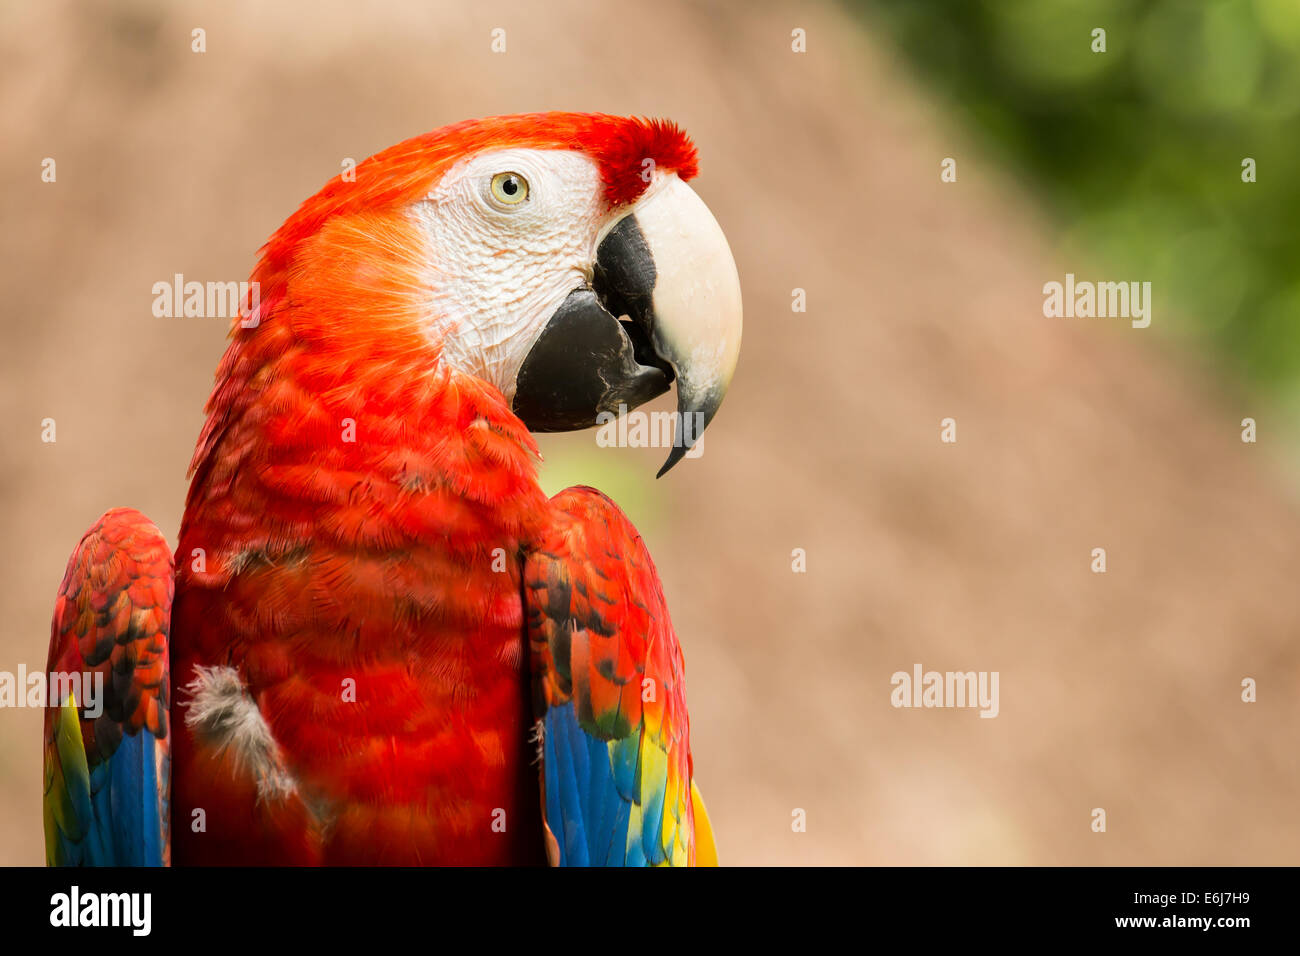 Portrait of colorful Scarlet Macaw parrot in Mexico Stock Photo